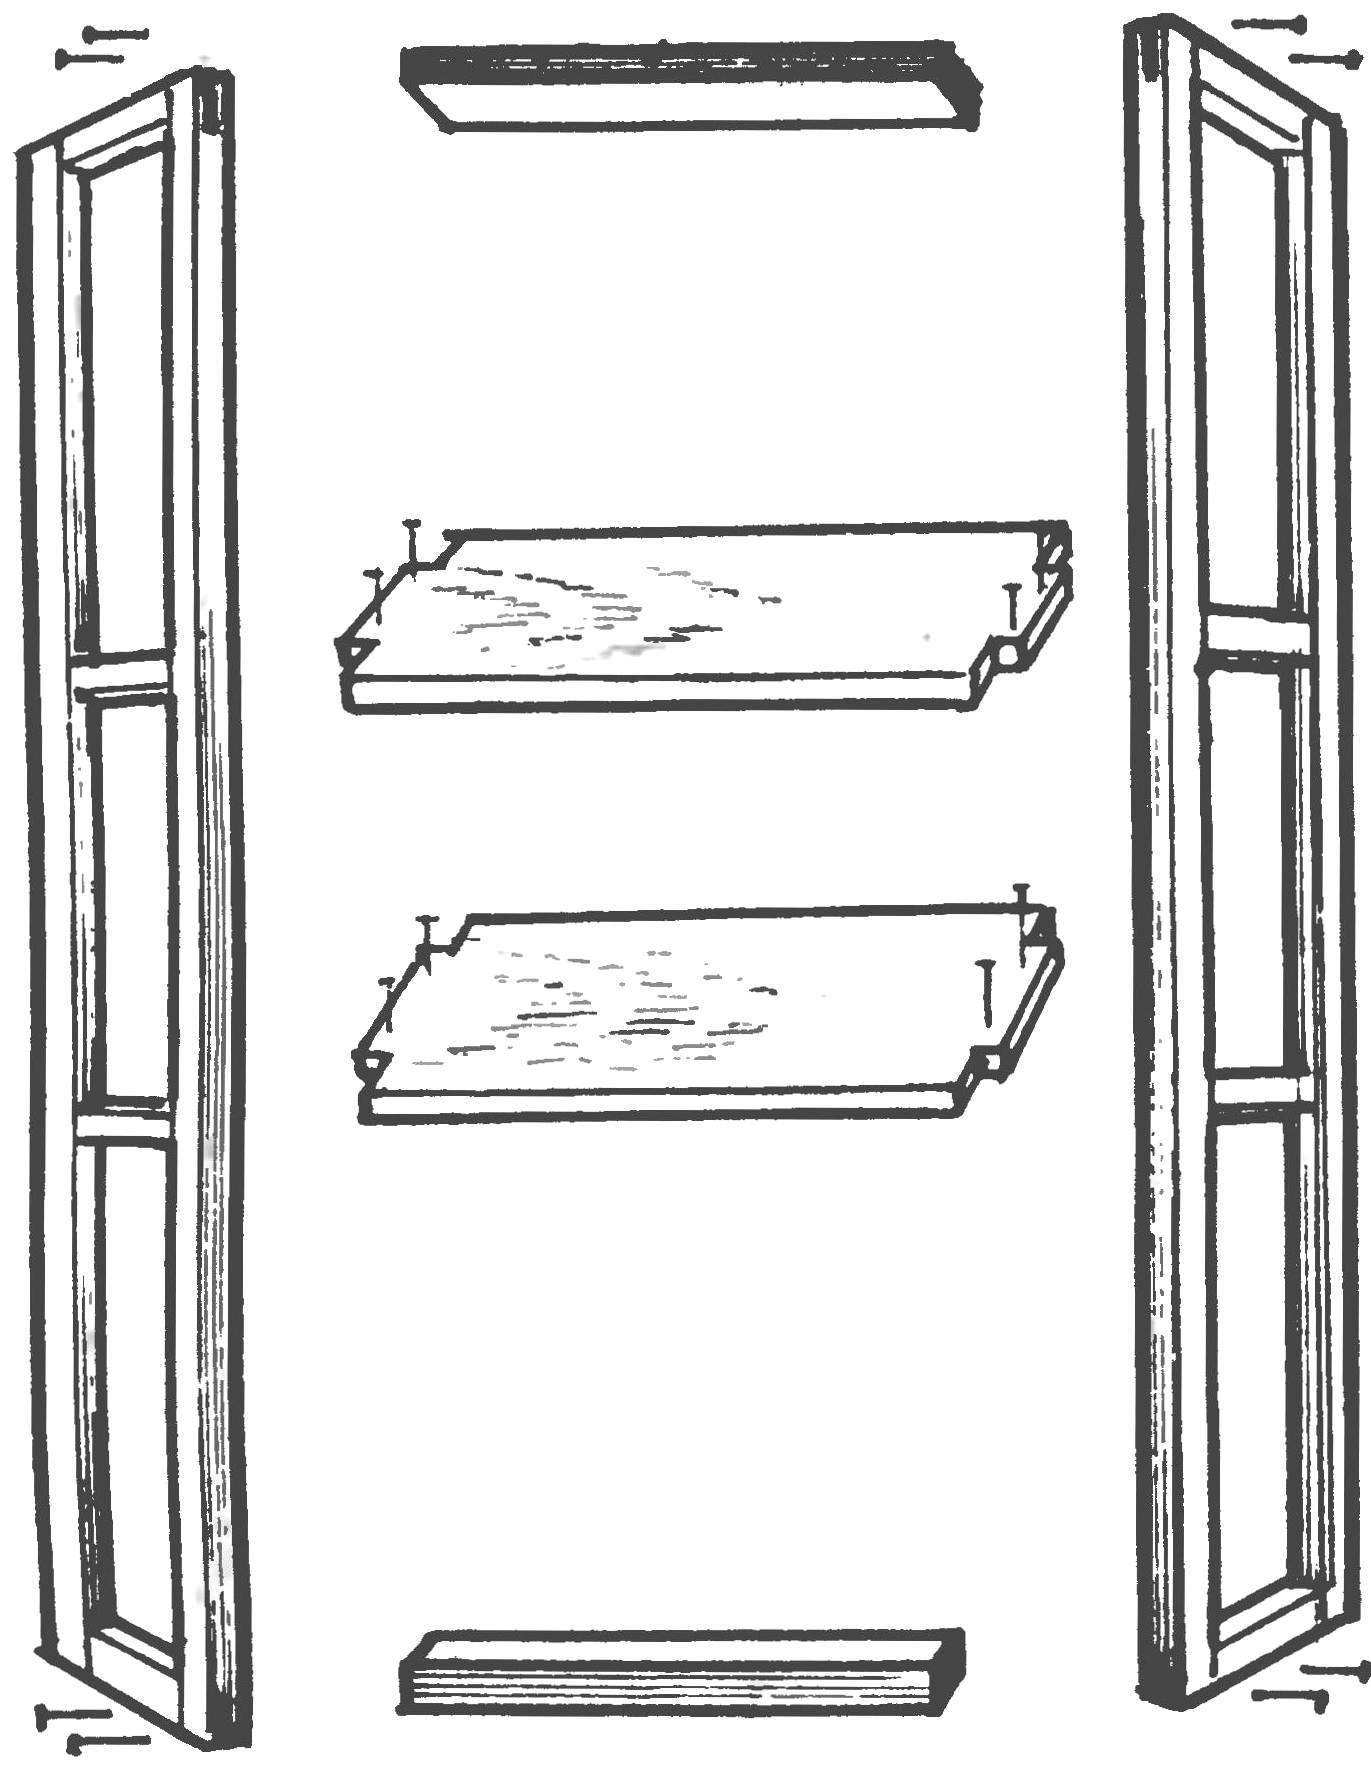 Assembly of parts and simplified version of the greenhouse window — without door and glass